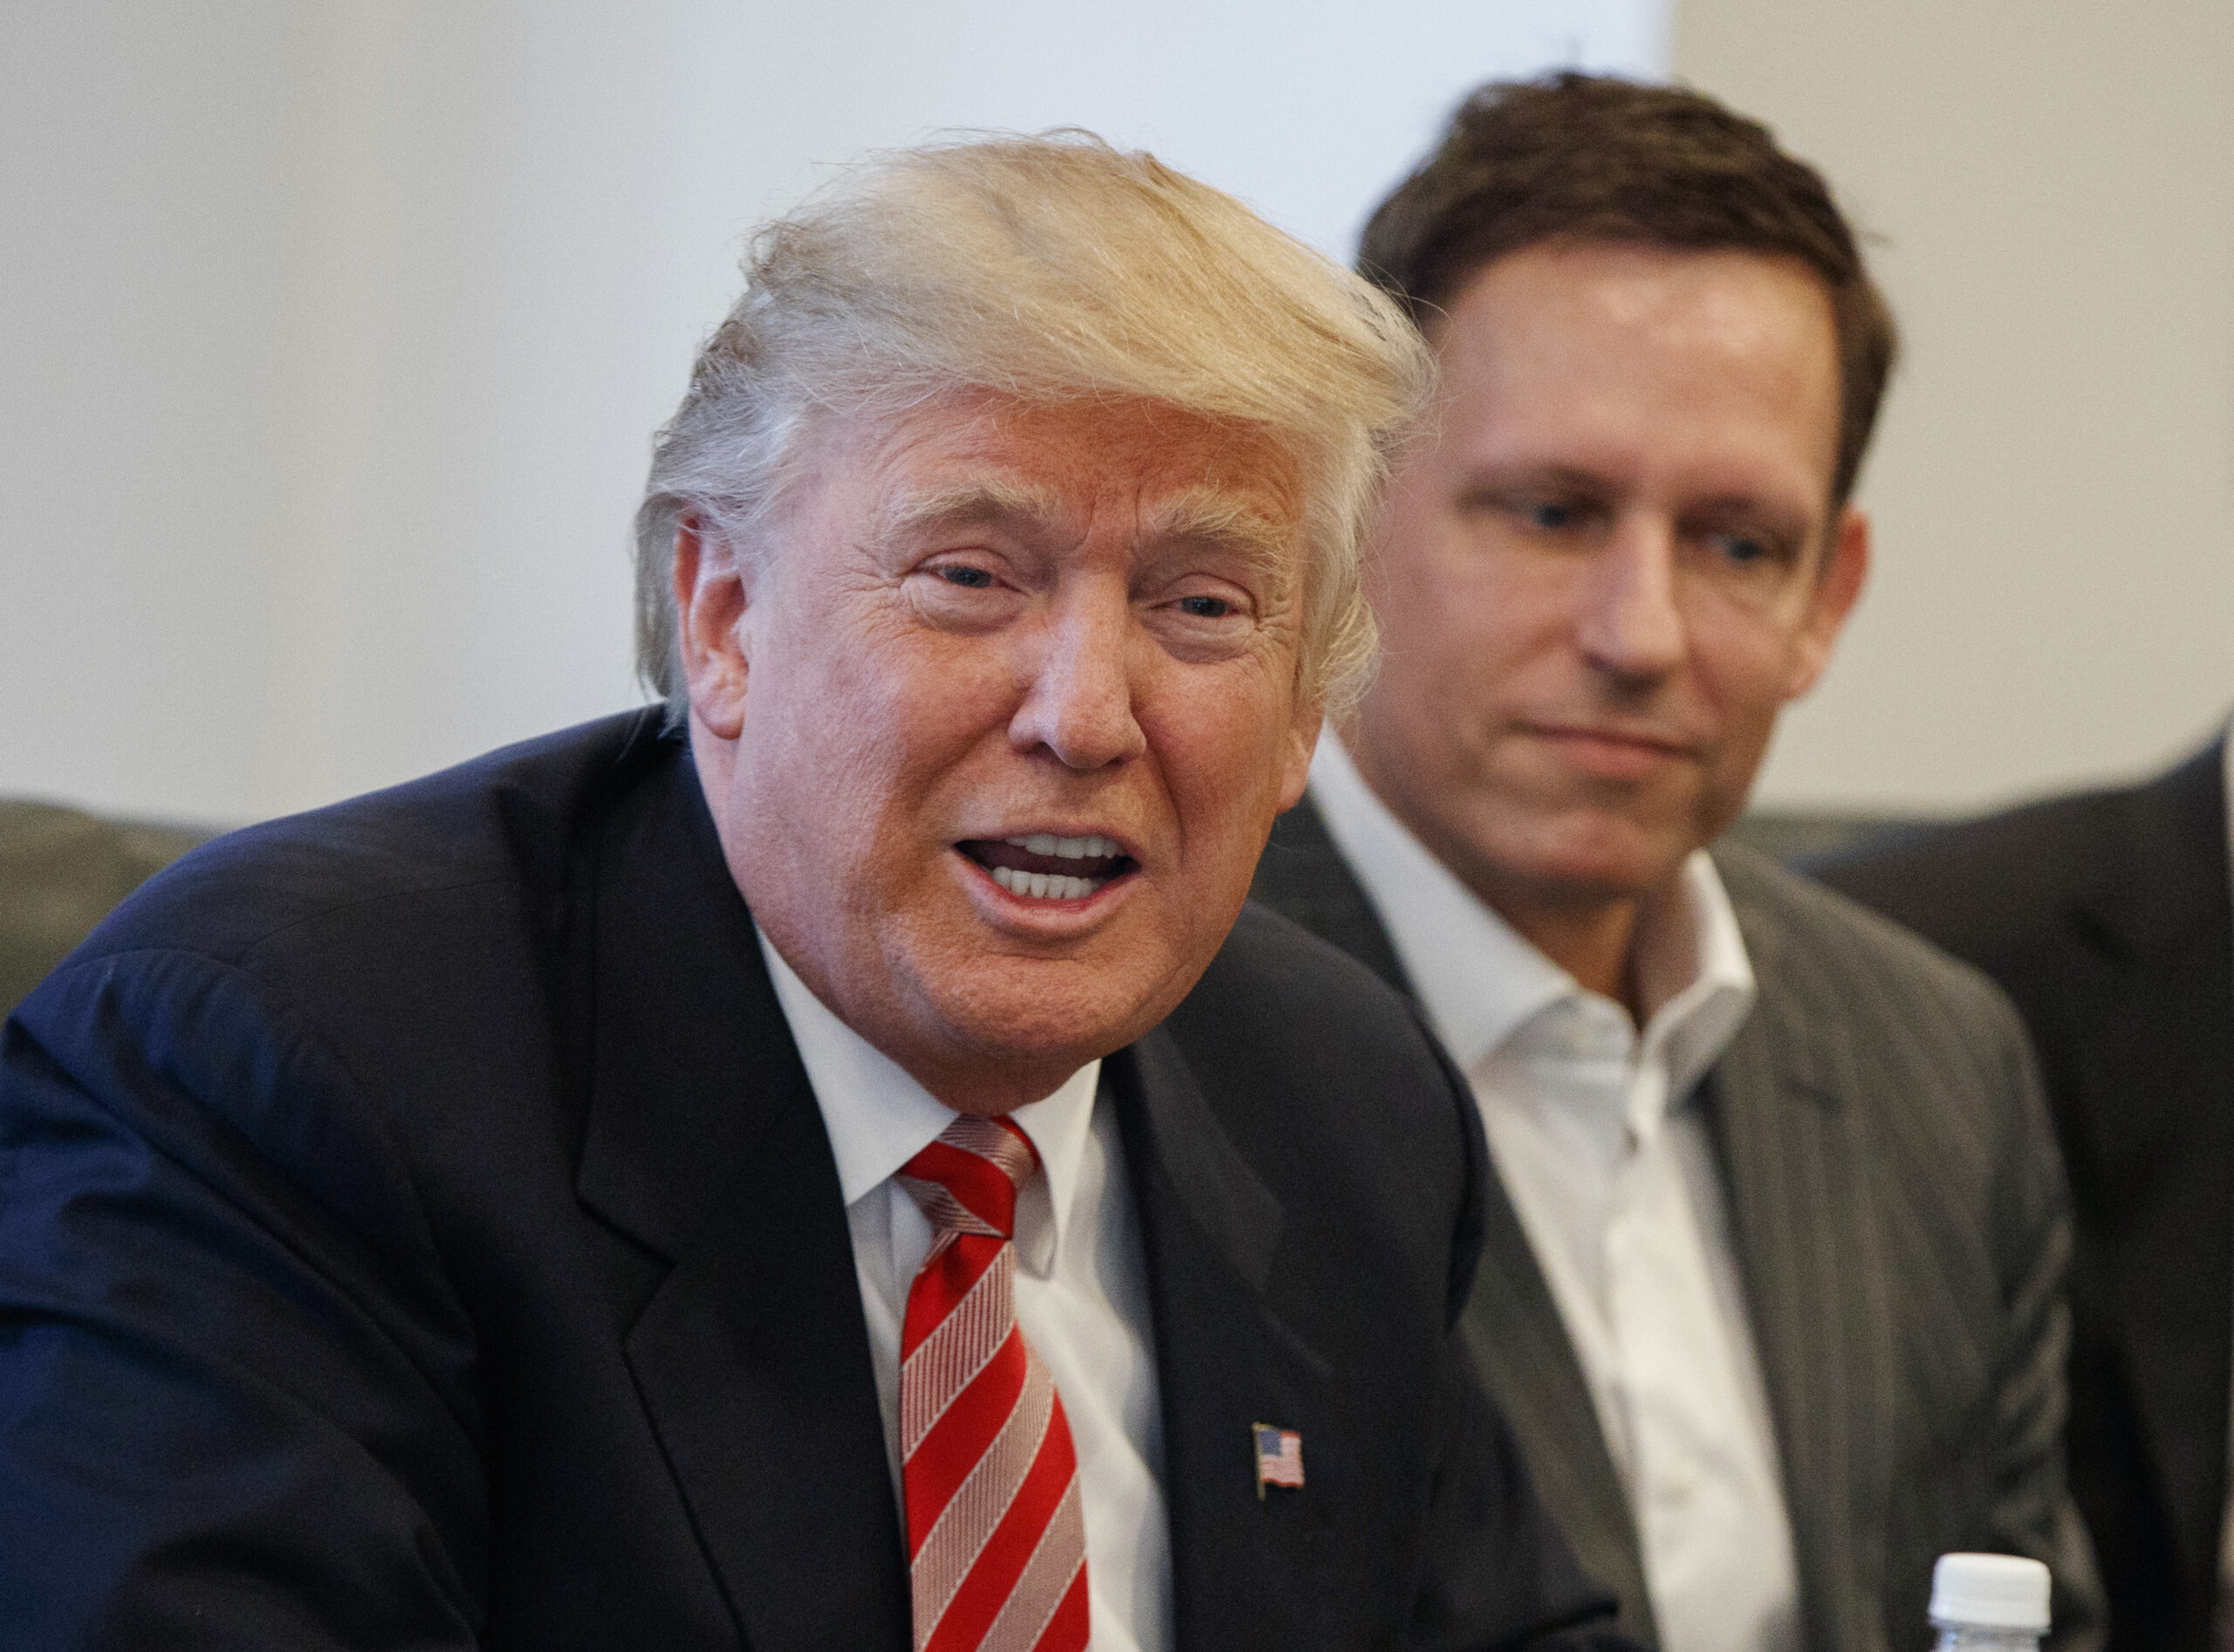 Peter Thiel Says Trump Failed to Meet Even His ‘Low Expectations’: ‘There Are a Lot of Things I Got Wrong’